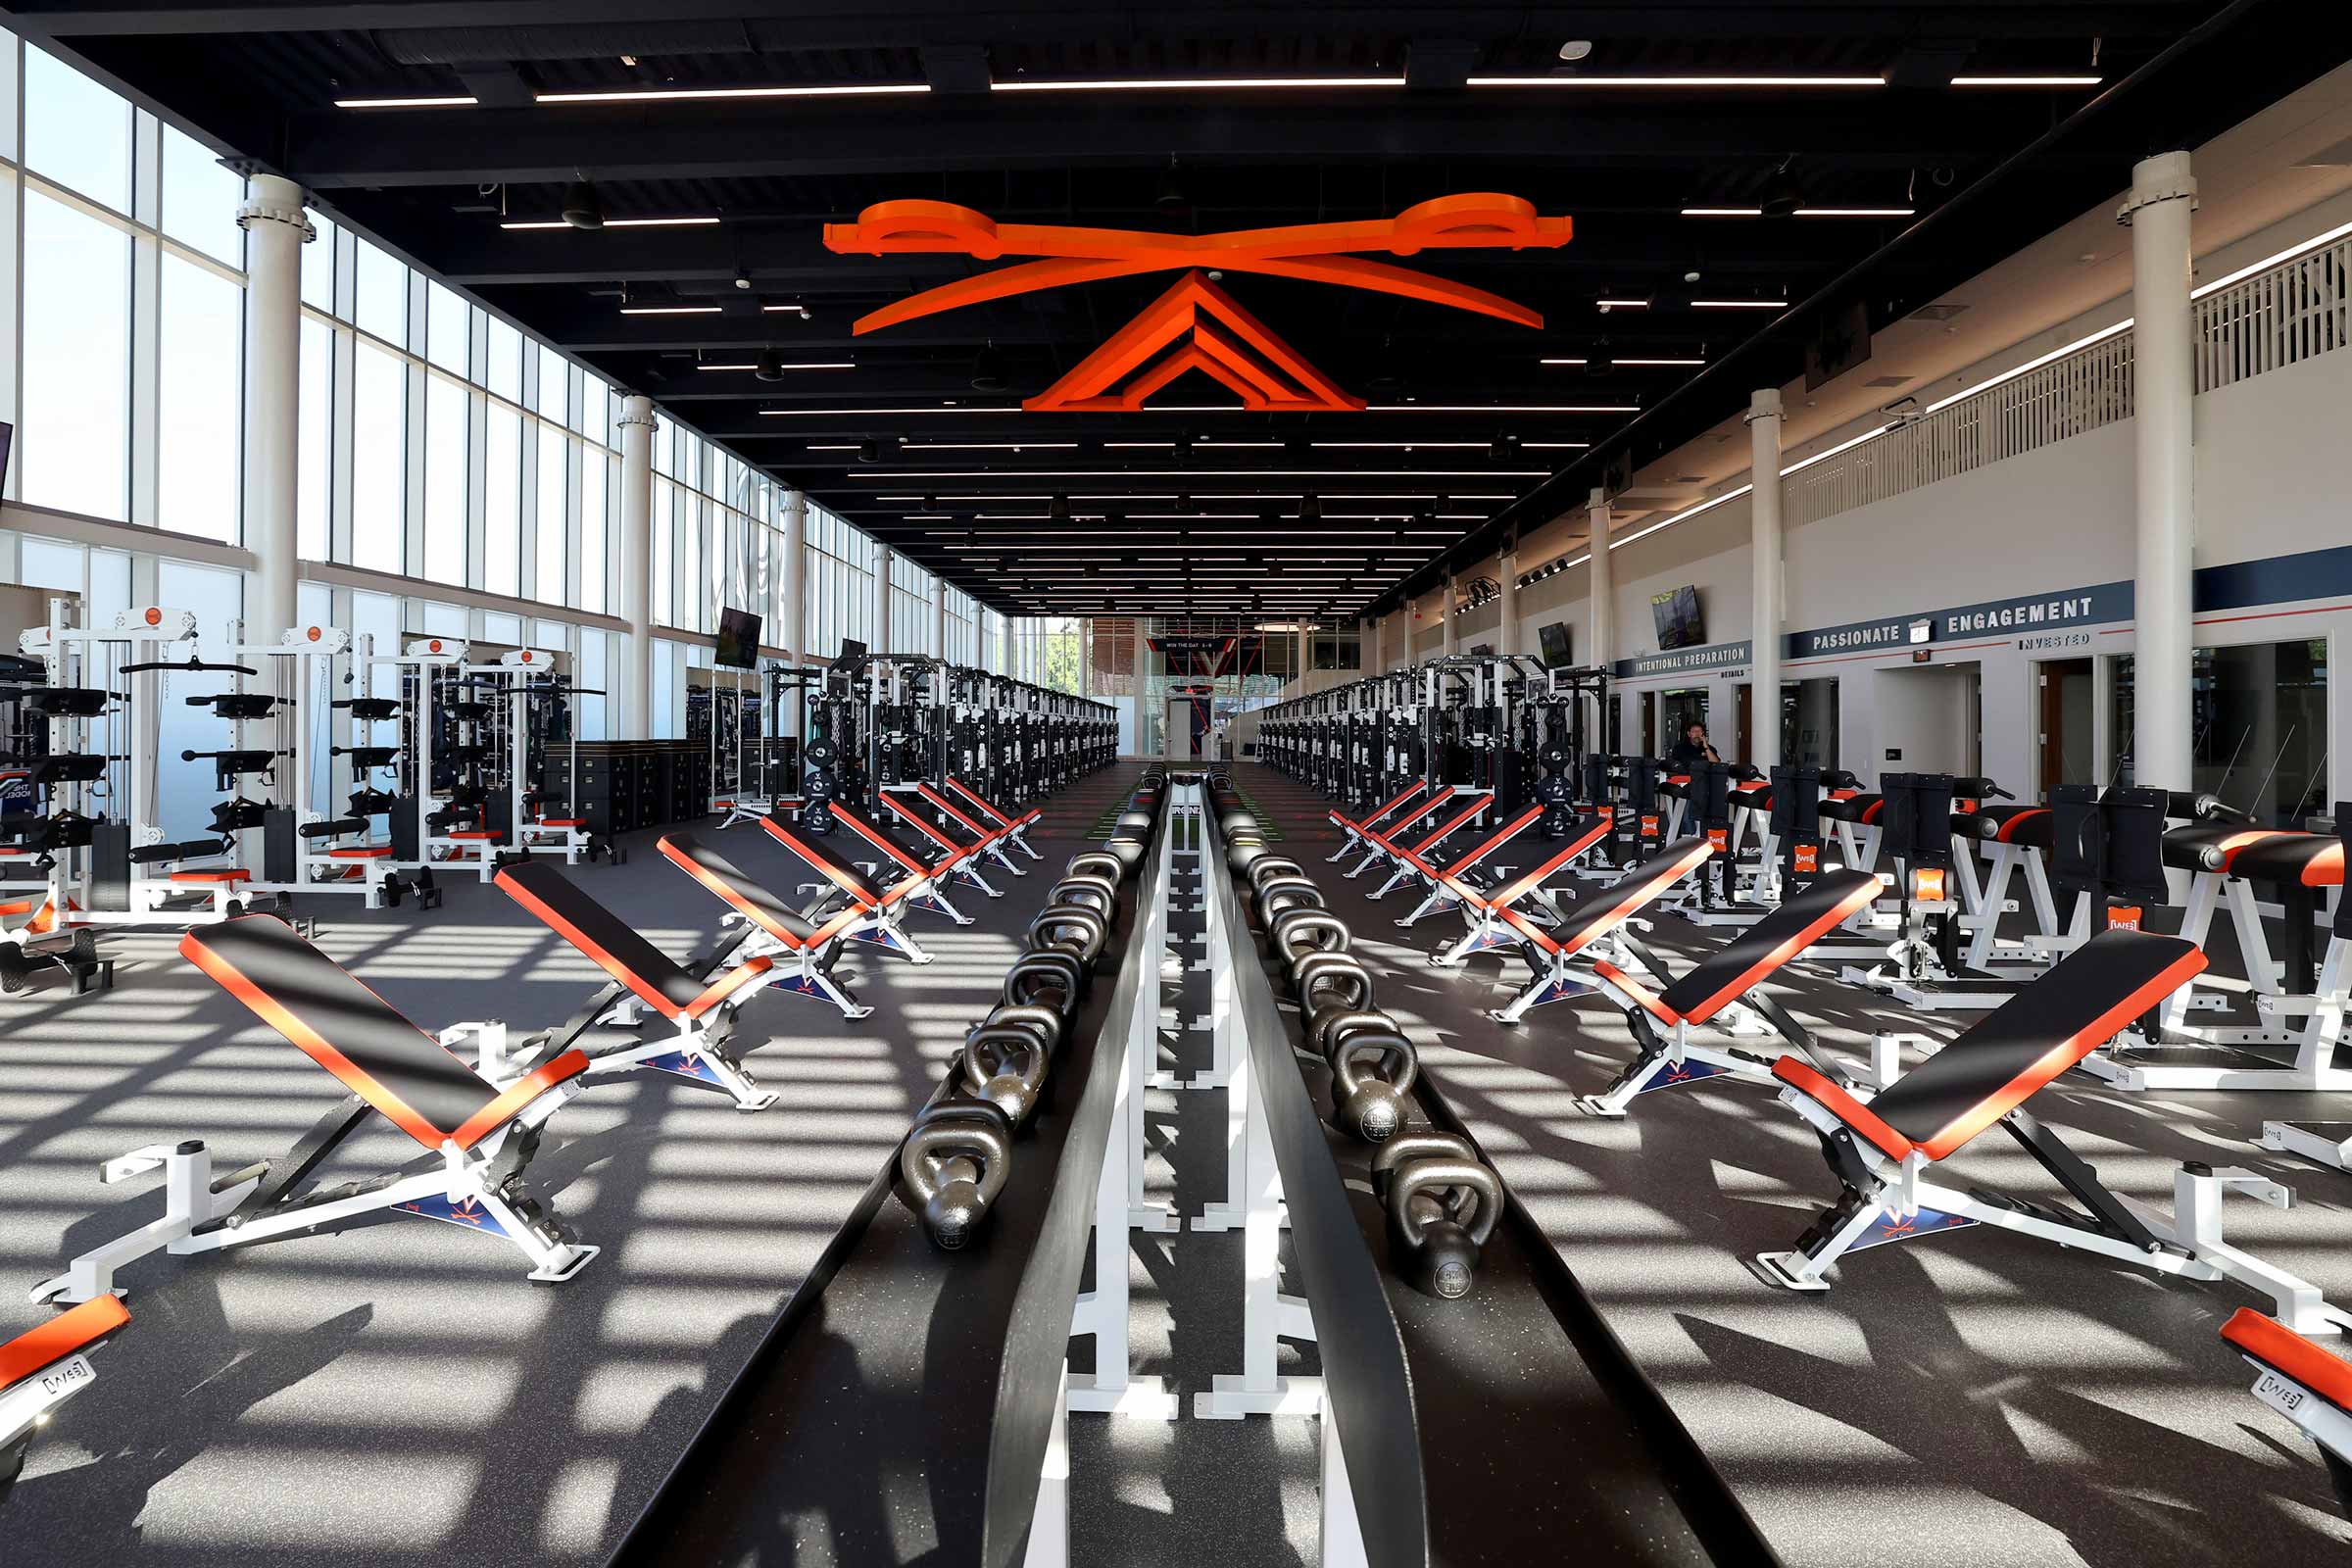 Rows of weight lifting benches and machines line the facility